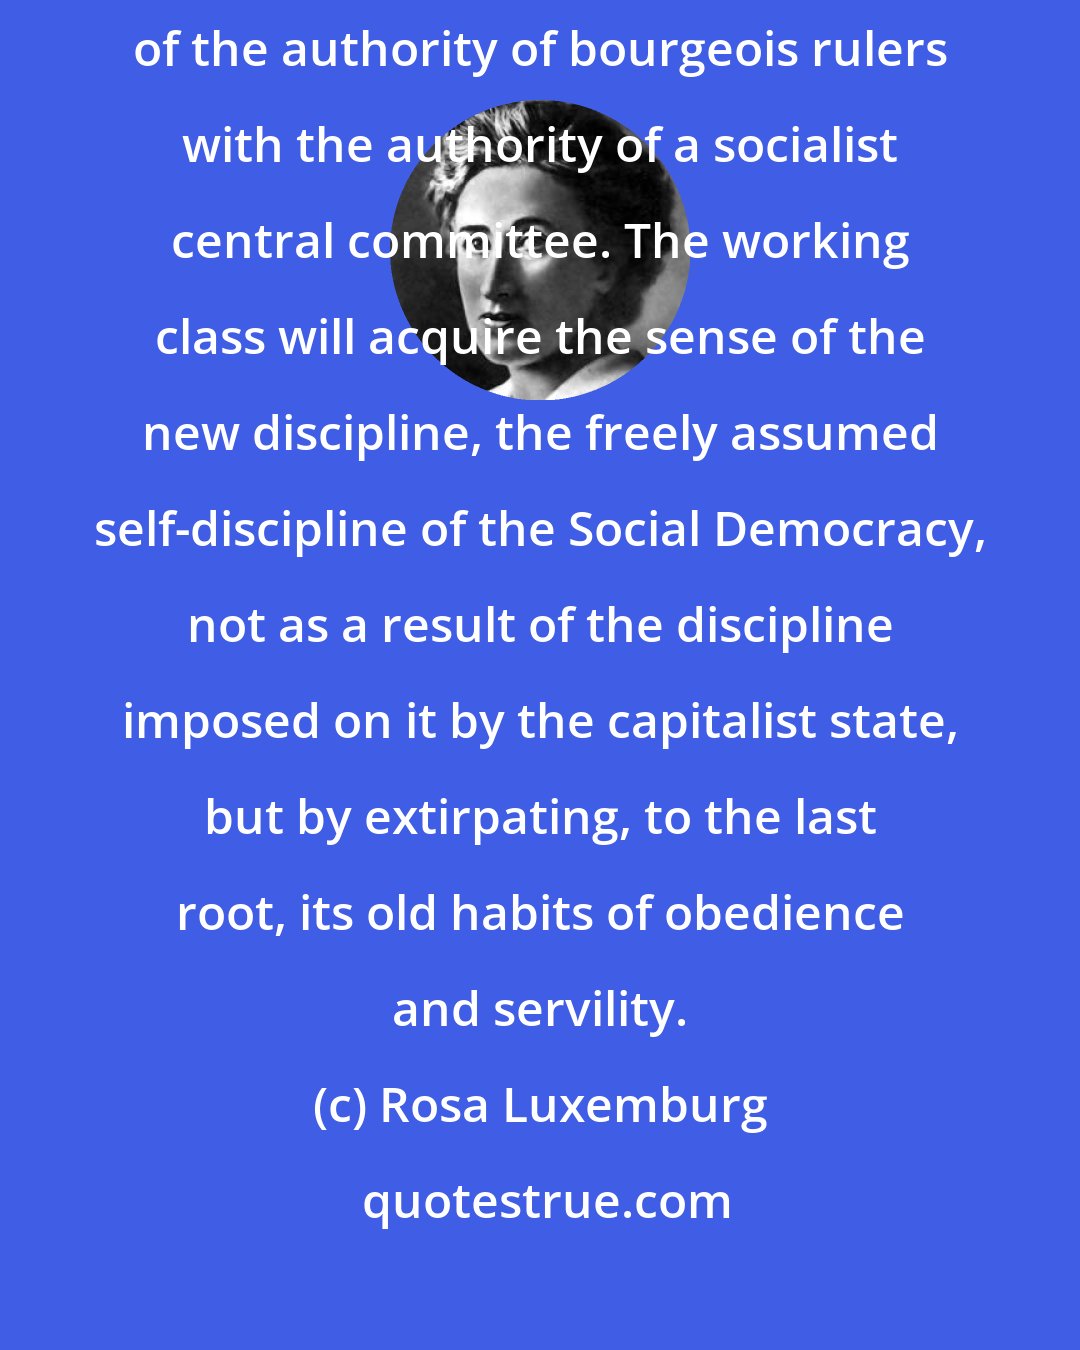 Rosa Luxemburg: The self-discipline of the Social Democracy is not merely the replacement of the authority of bourgeois rulers with the authority of a socialist central committee. The working class will acquire the sense of the new discipline, the freely assumed self-discipline of the Social Democracy, not as a result of the discipline imposed on it by the capitalist state, but by extirpating, to the last root, its old habits of obedience and servility.